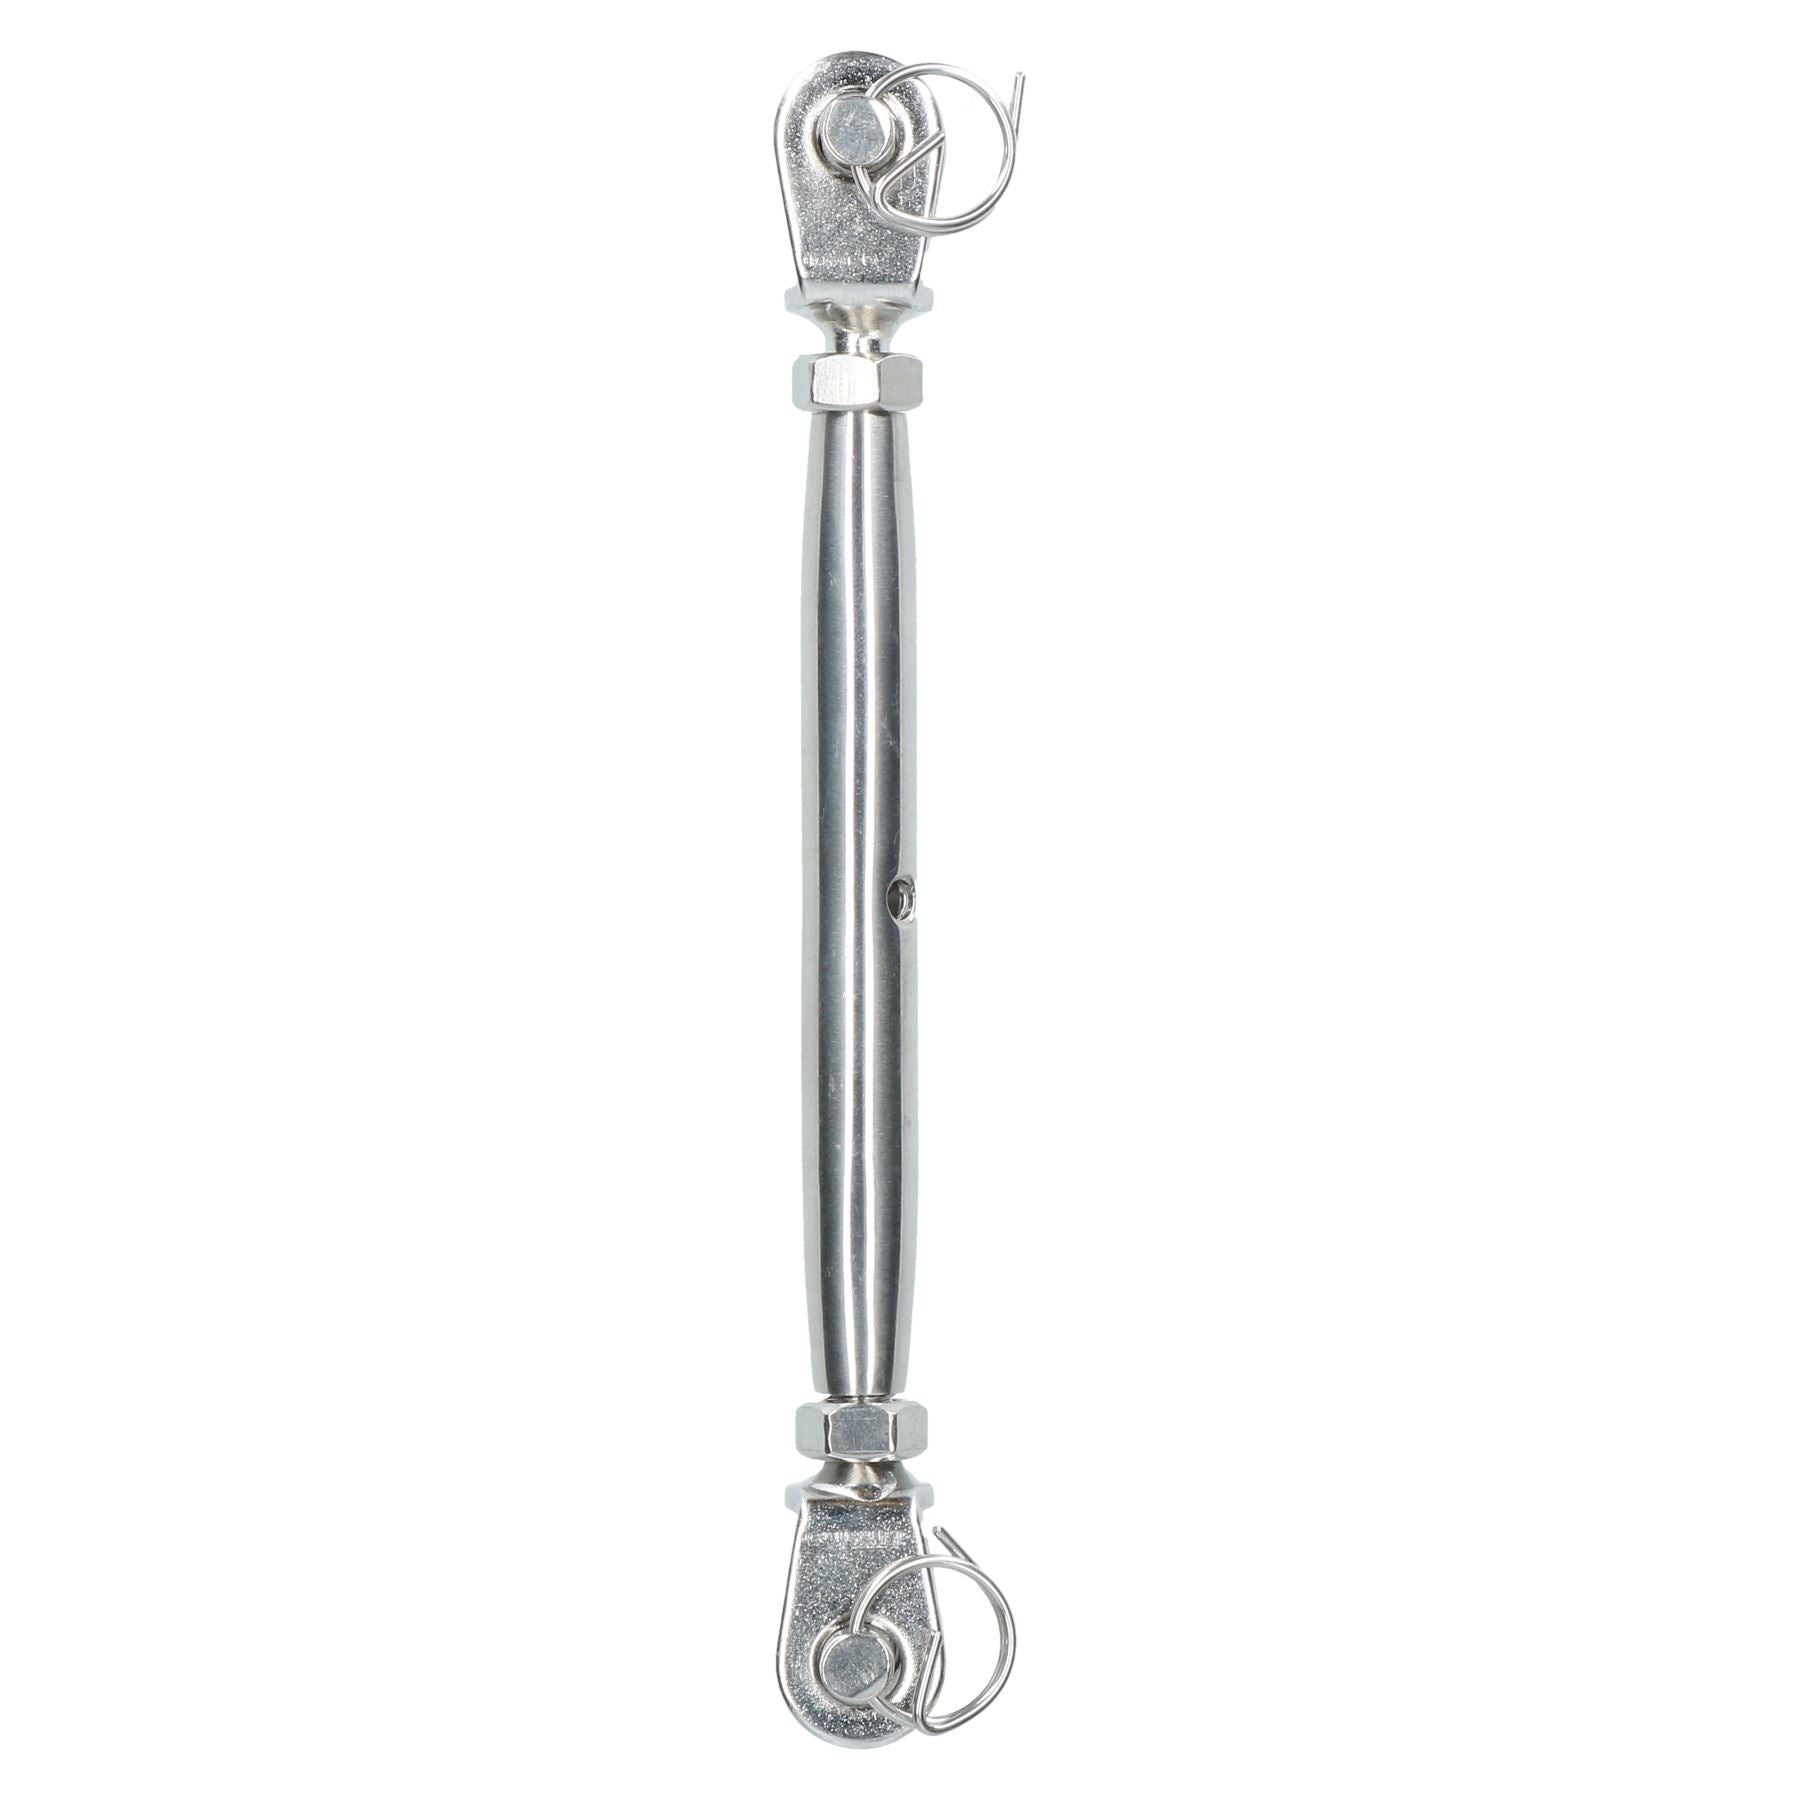 Rigging Screw 8mm Jaw to Jaw Turnbuckle Straining Marine Grade 316 Stainless